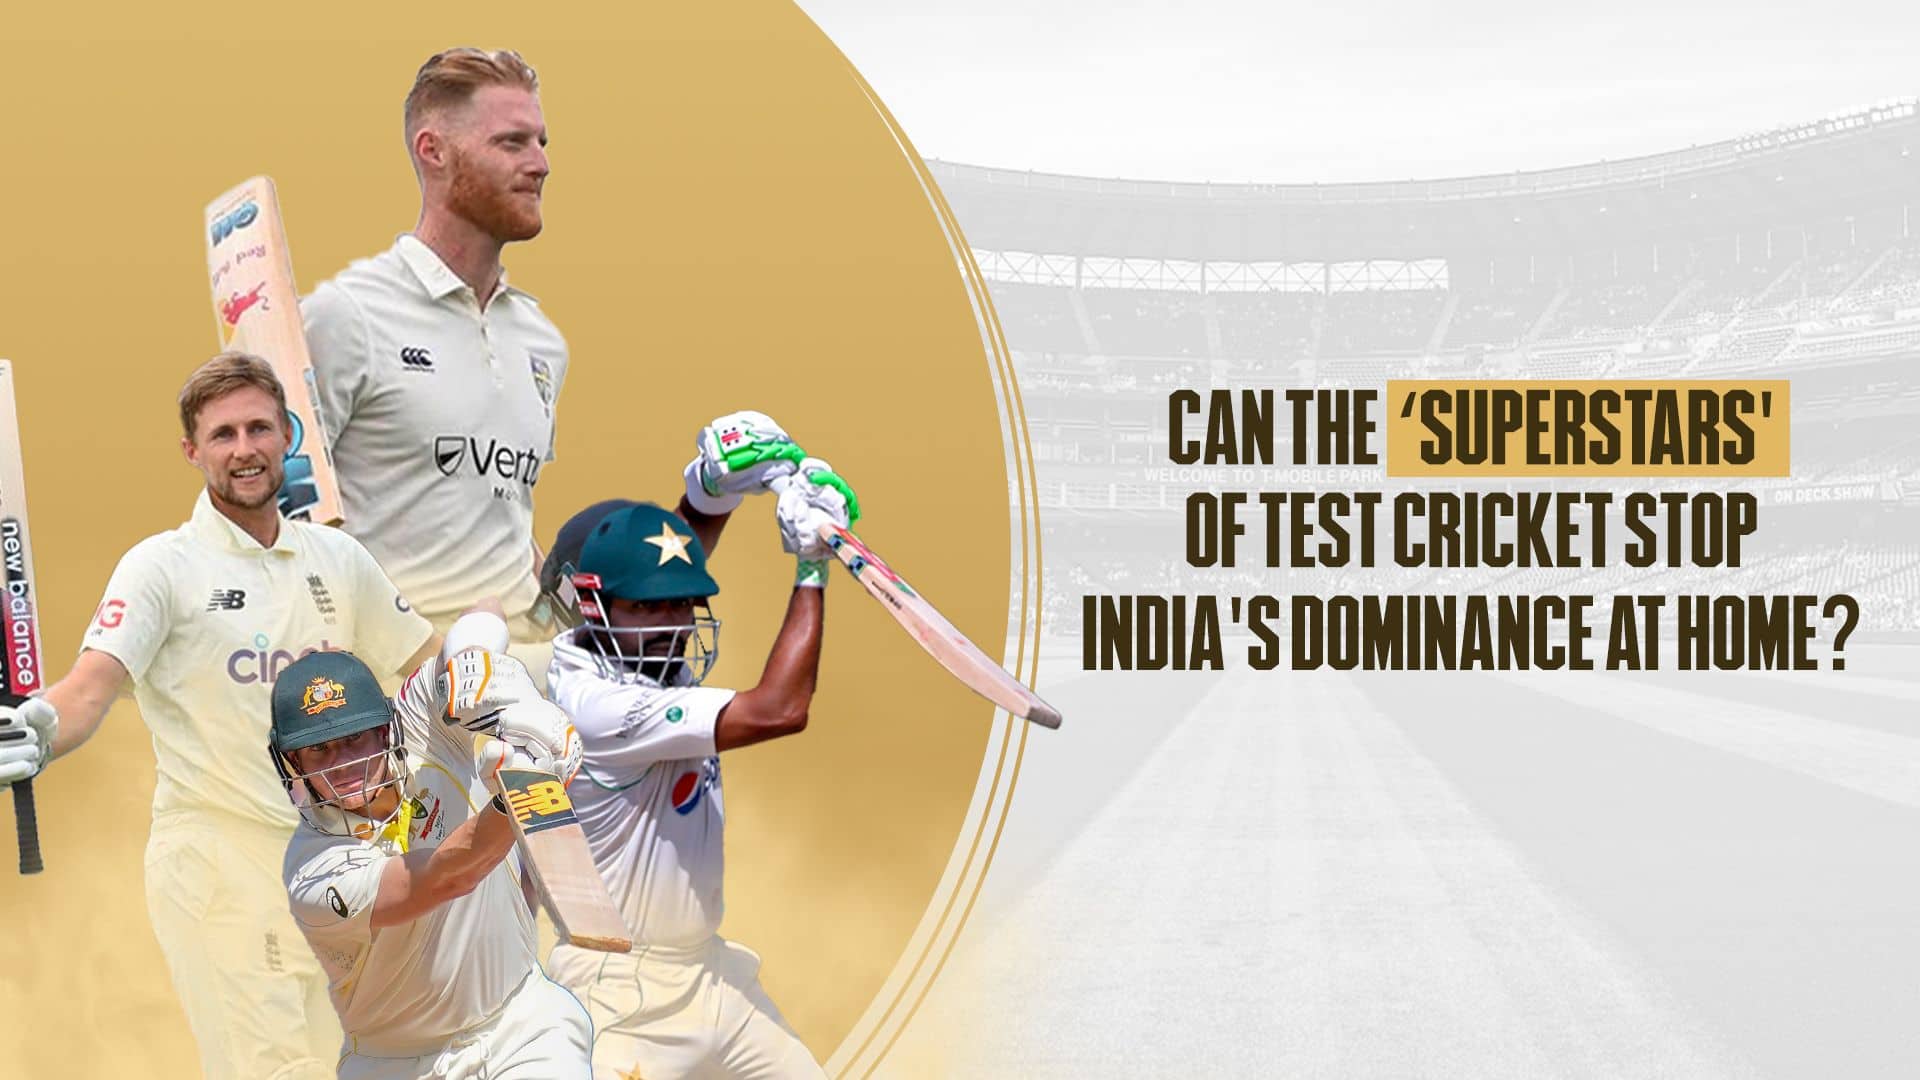 Can the 'Superstars' of Test cricket stop India's dominance at home?